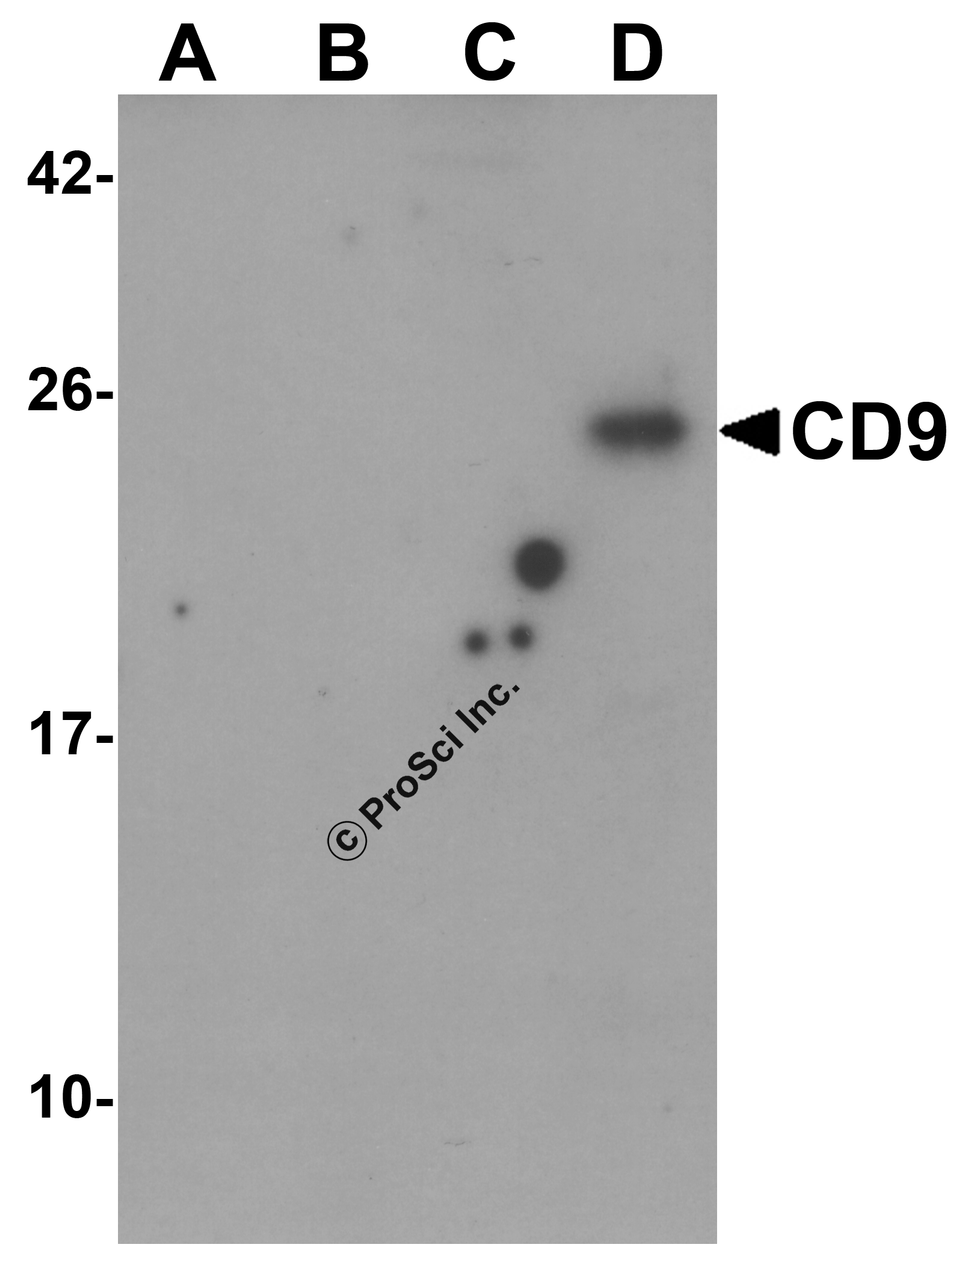 Western blot analysis of CD9 in (A) human ovary, (B) human uterus, (C) human ovary tumor, and (D) human uterus tumor tissue lysate with CD9 antibody at 1 &#956;g/ml.